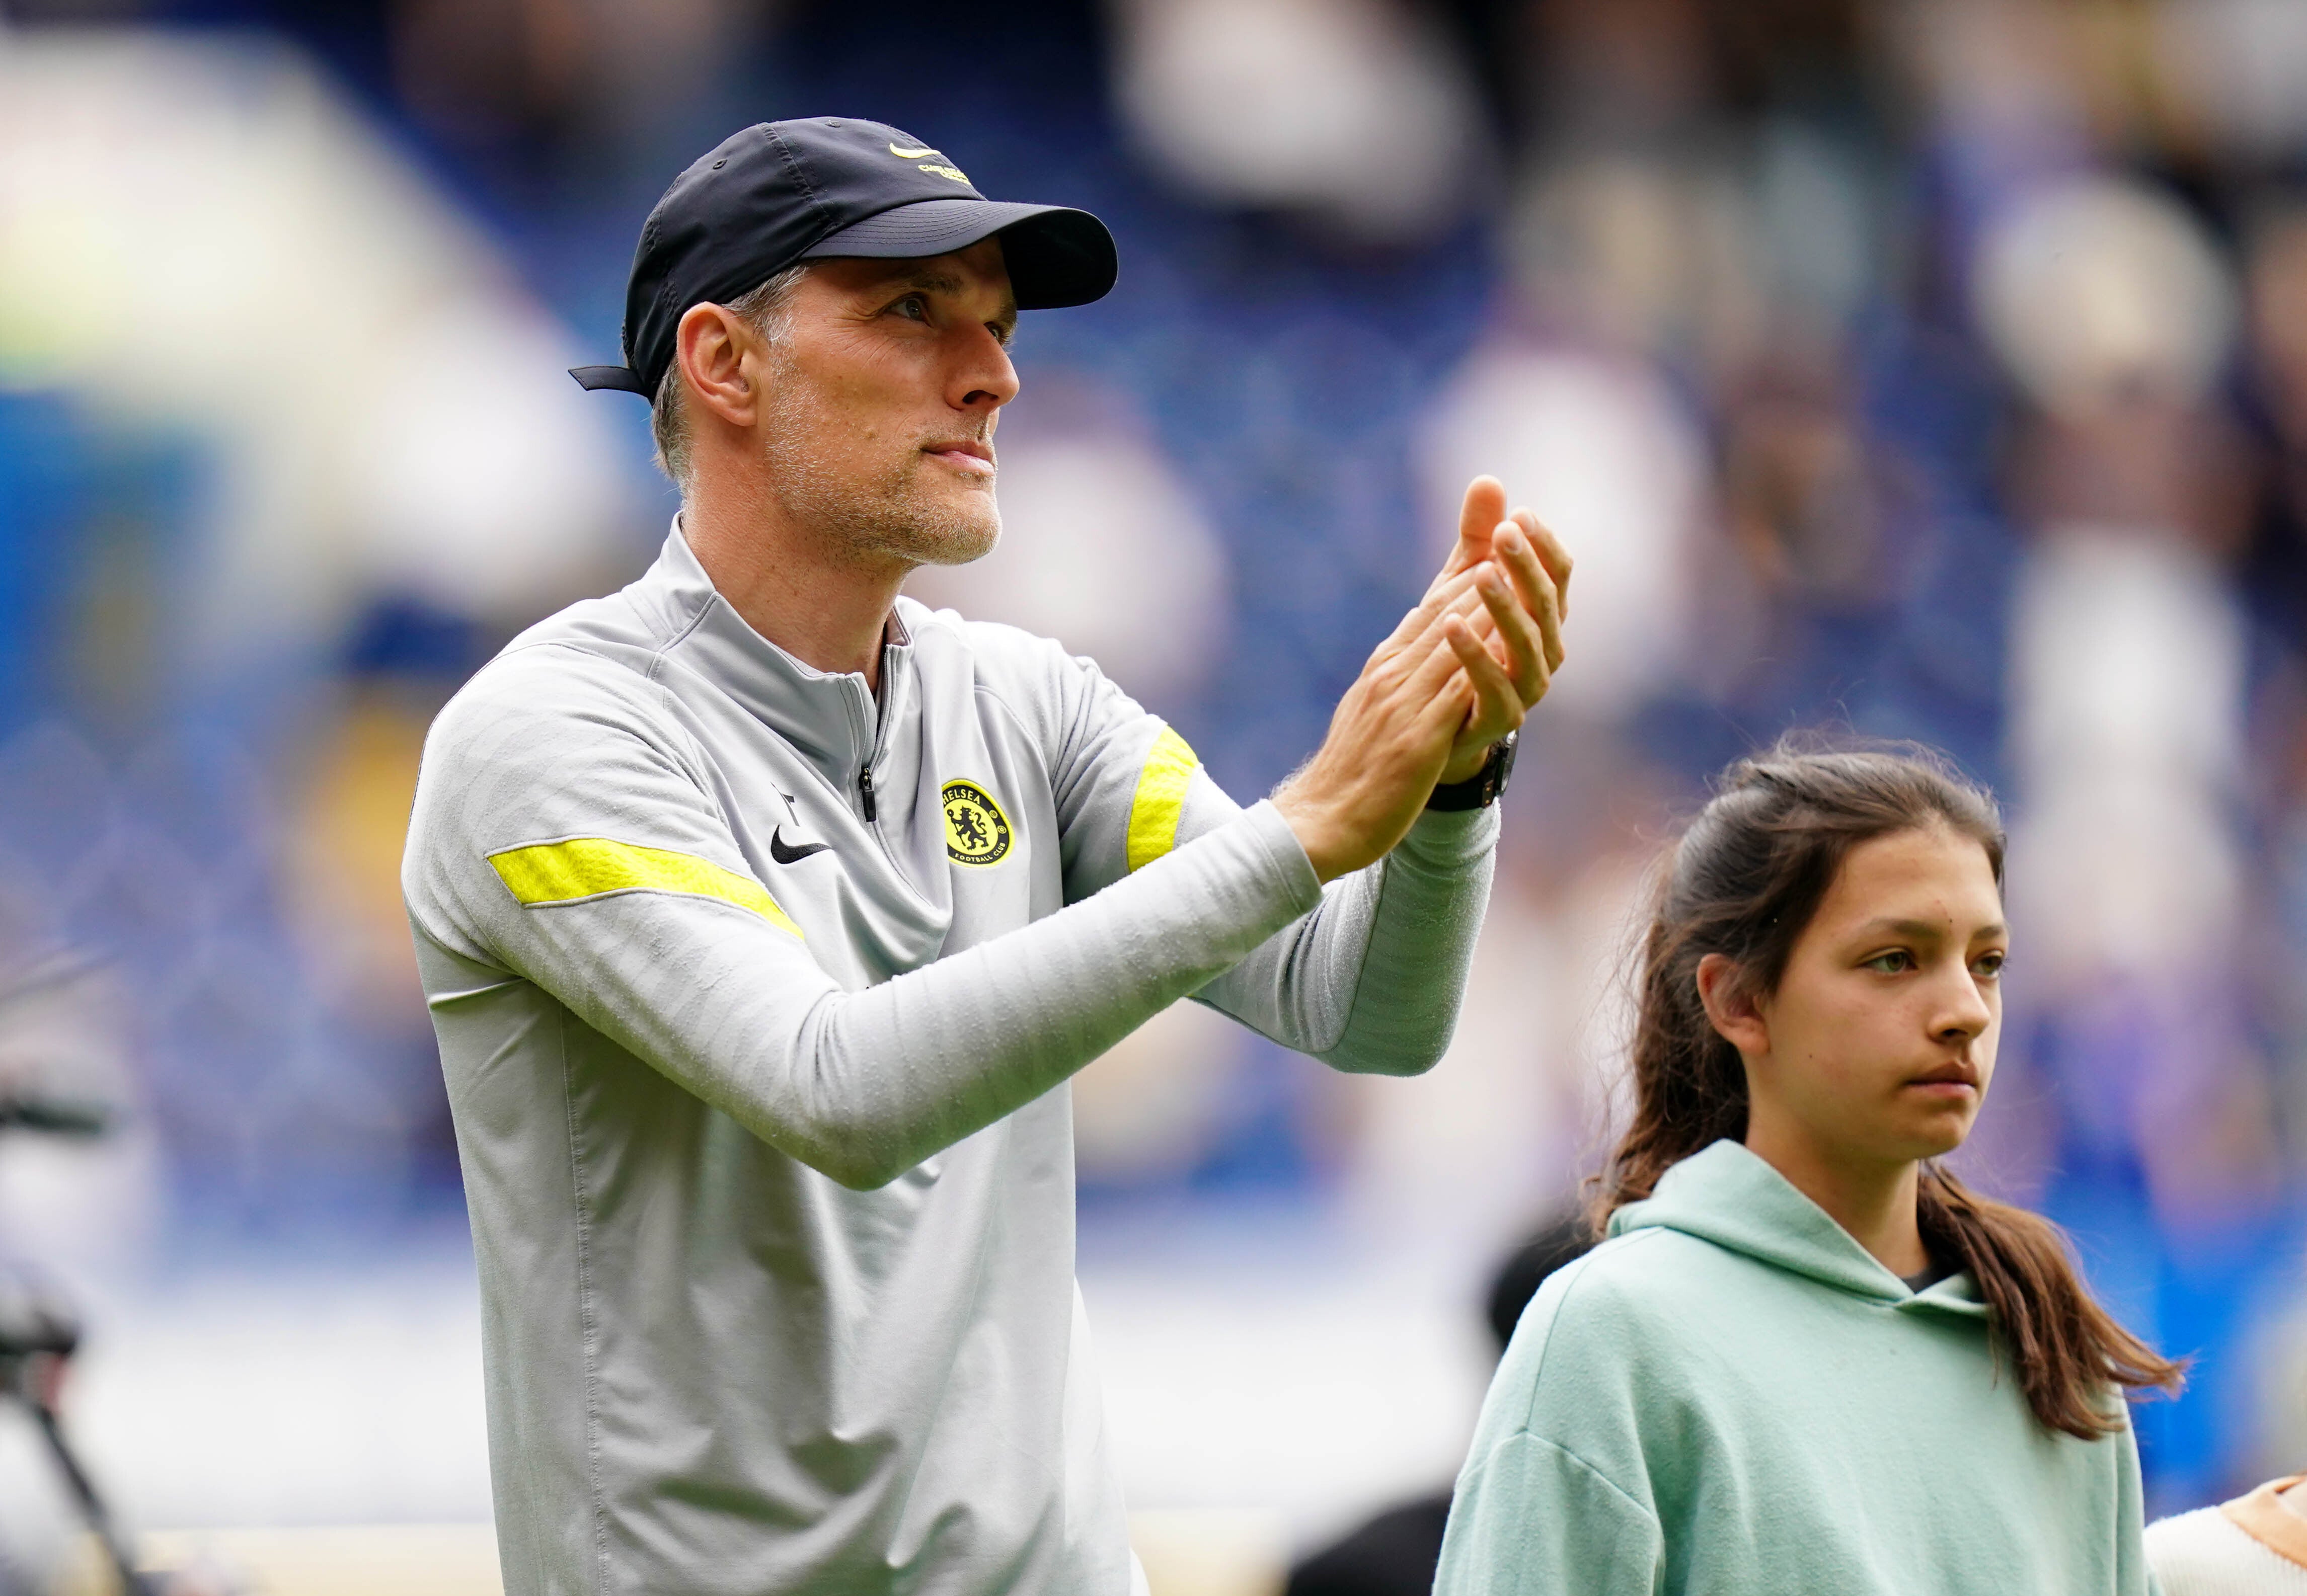 Tuchel is set to have a busy summer